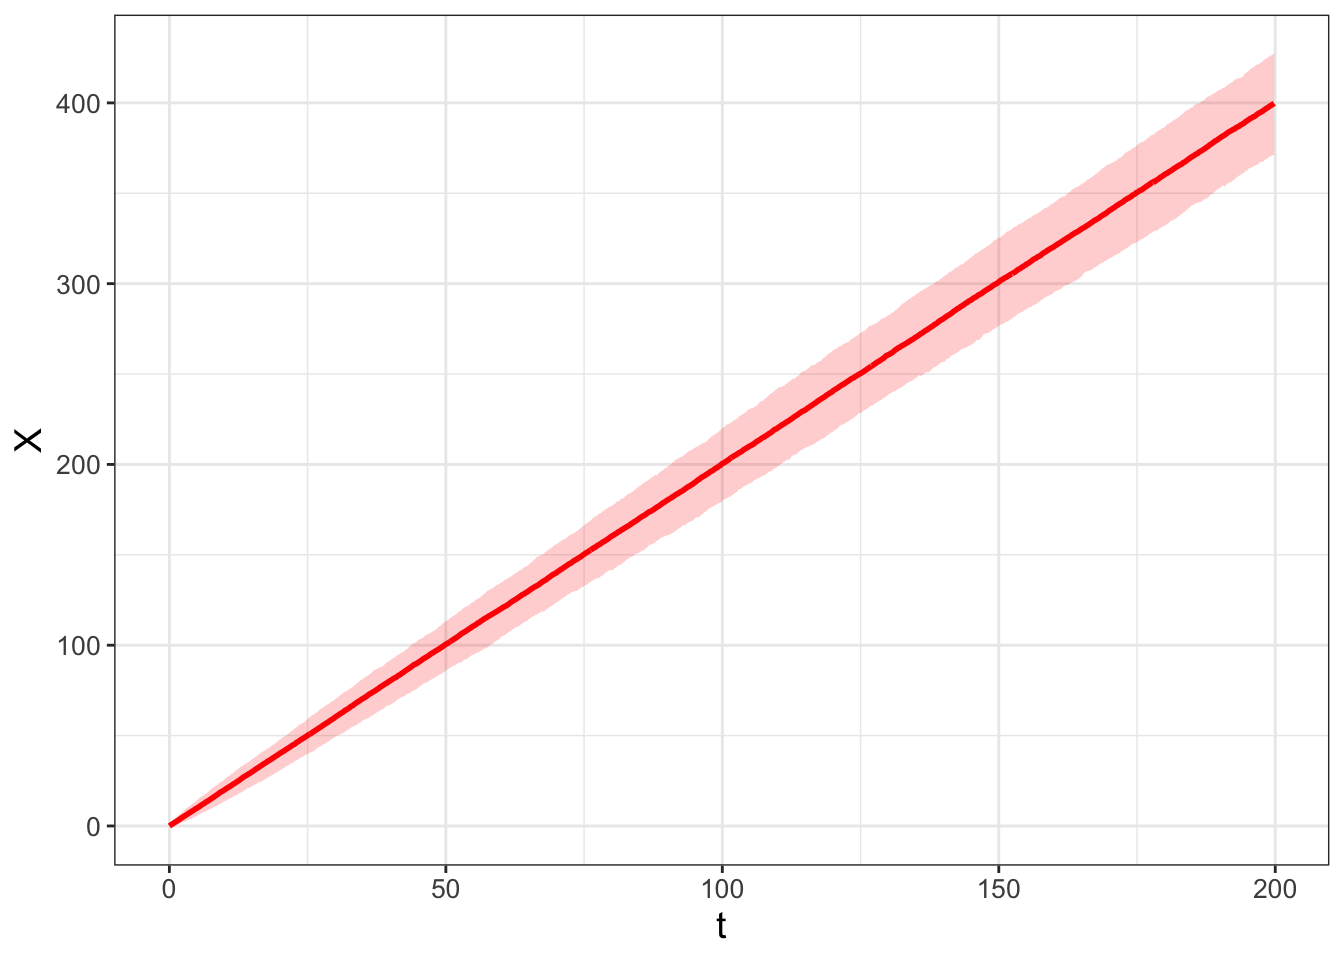 Ensemble average of 1000 realizations of the stochastic process $dX = 2 \; dt + dW(t)$.